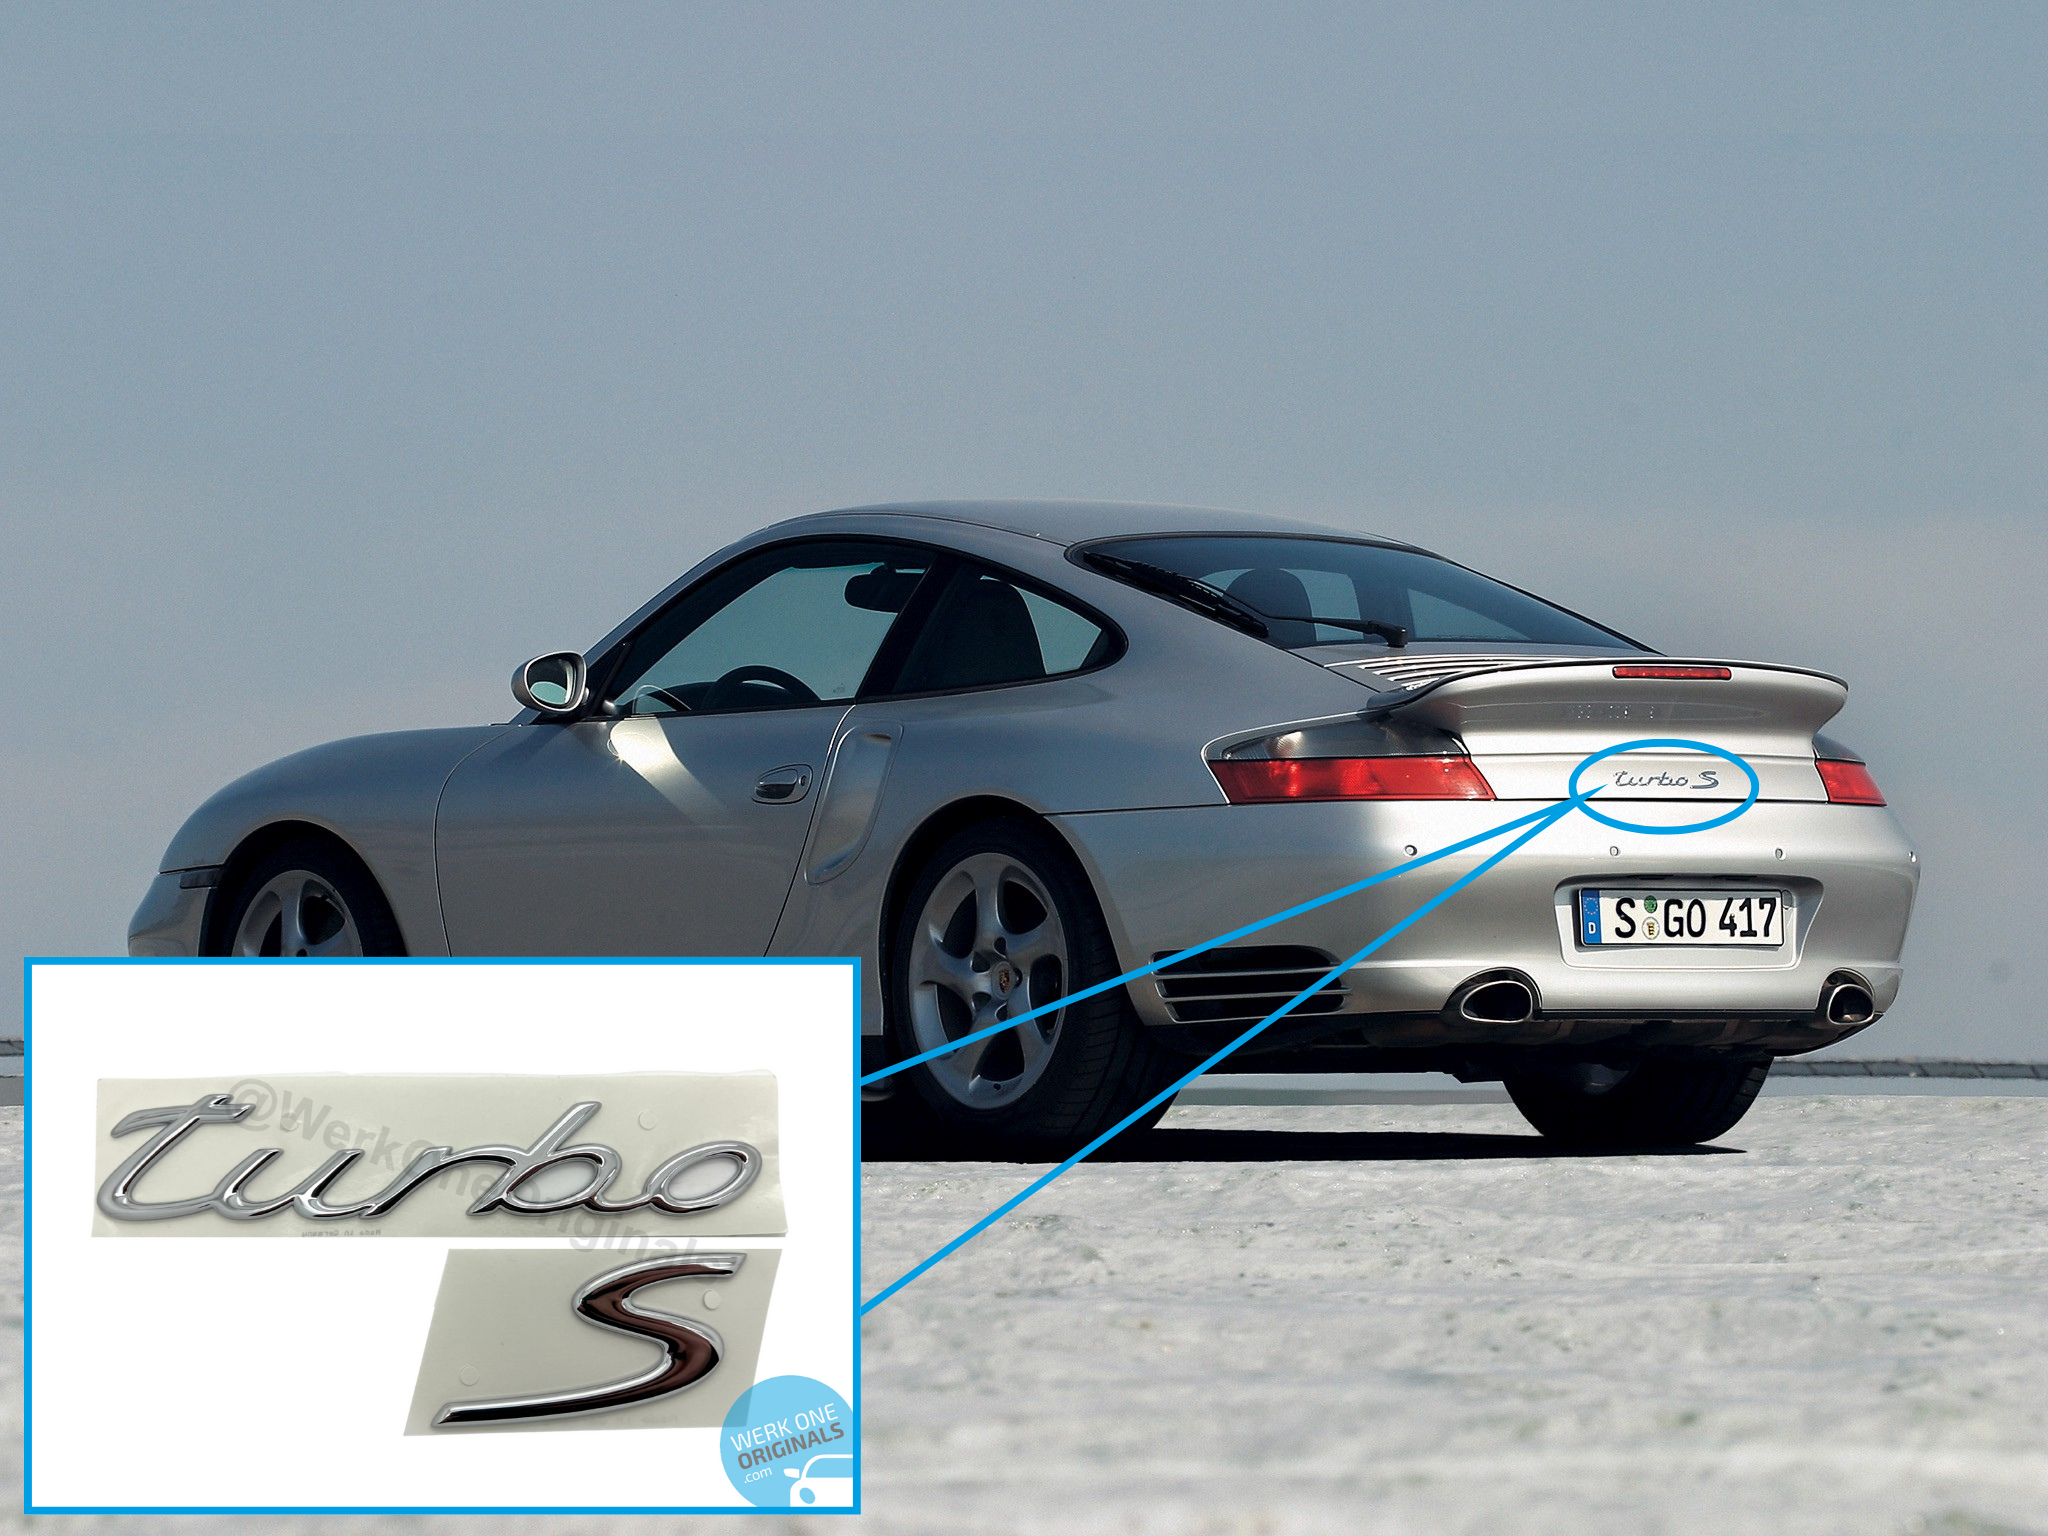 Porsche Official 'Turbo S' Rear Badge Decal in Chrome Silver for 996 Turbo S Models